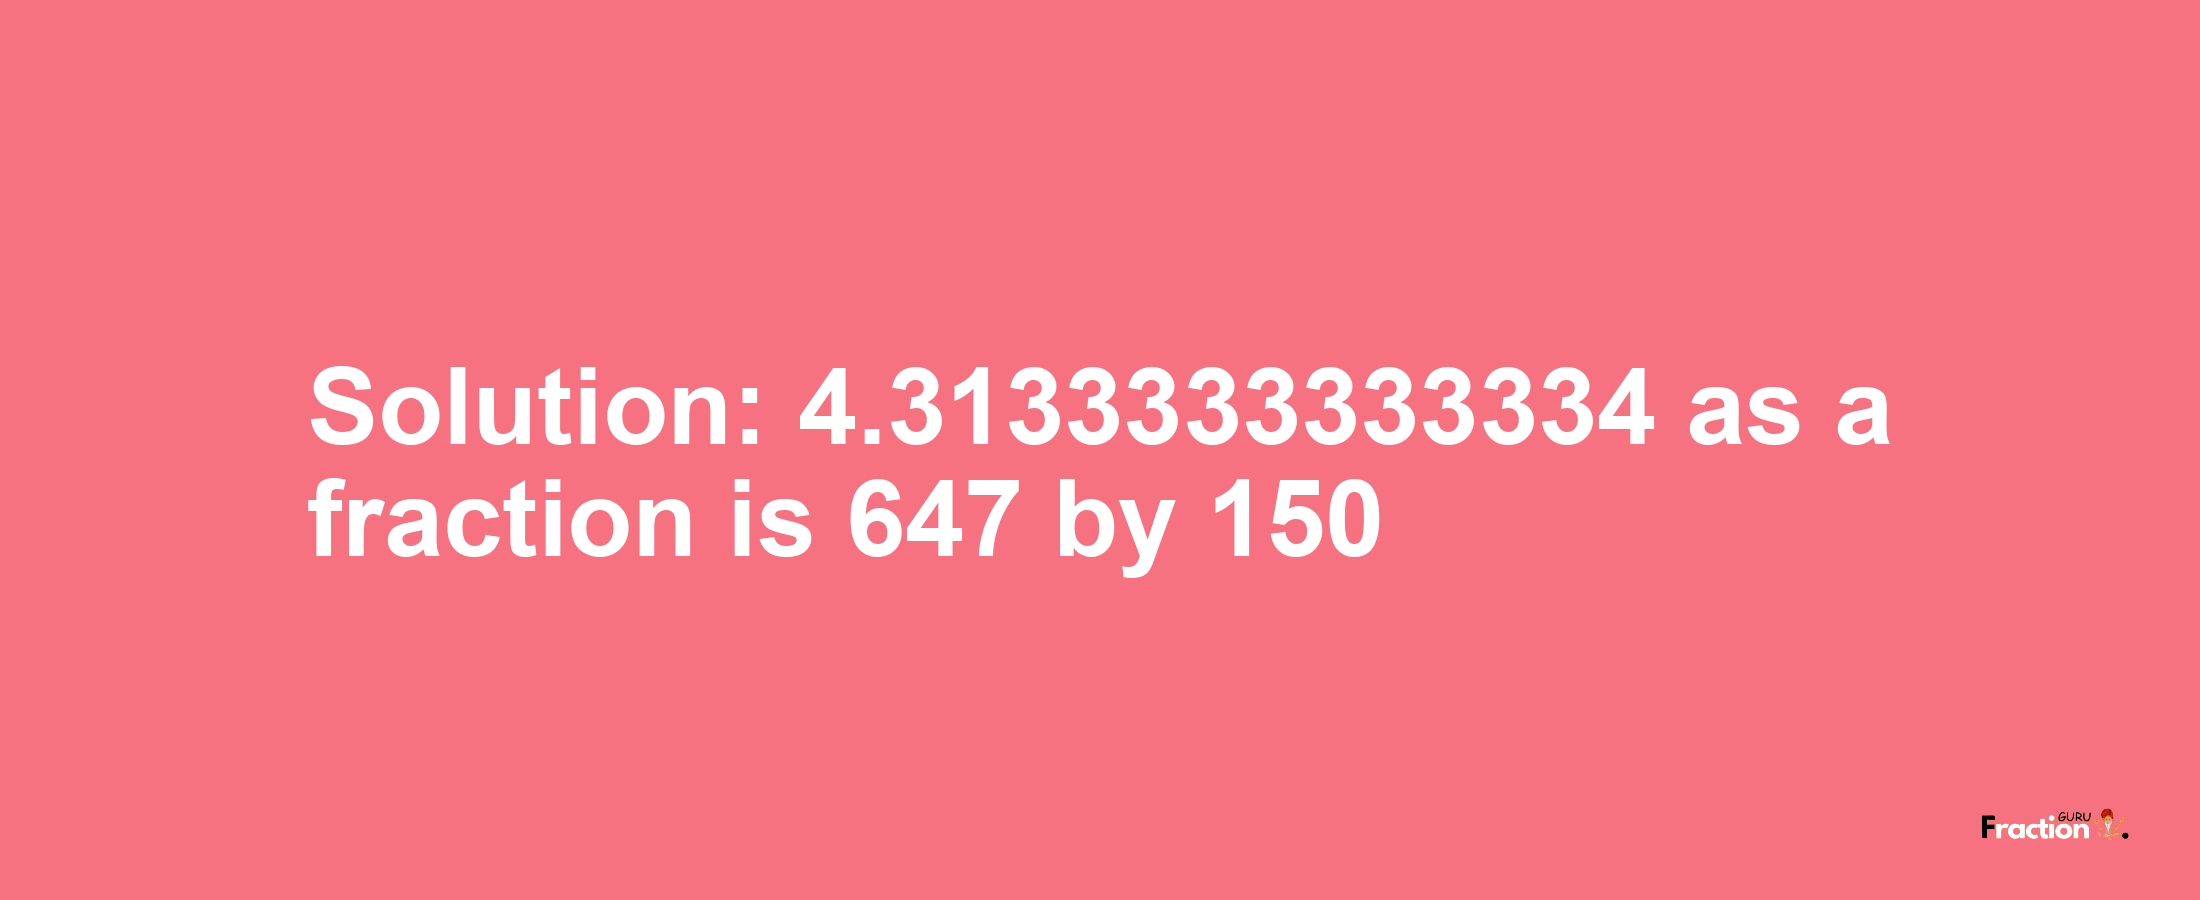 Solution:4.3133333333334 as a fraction is 647/150